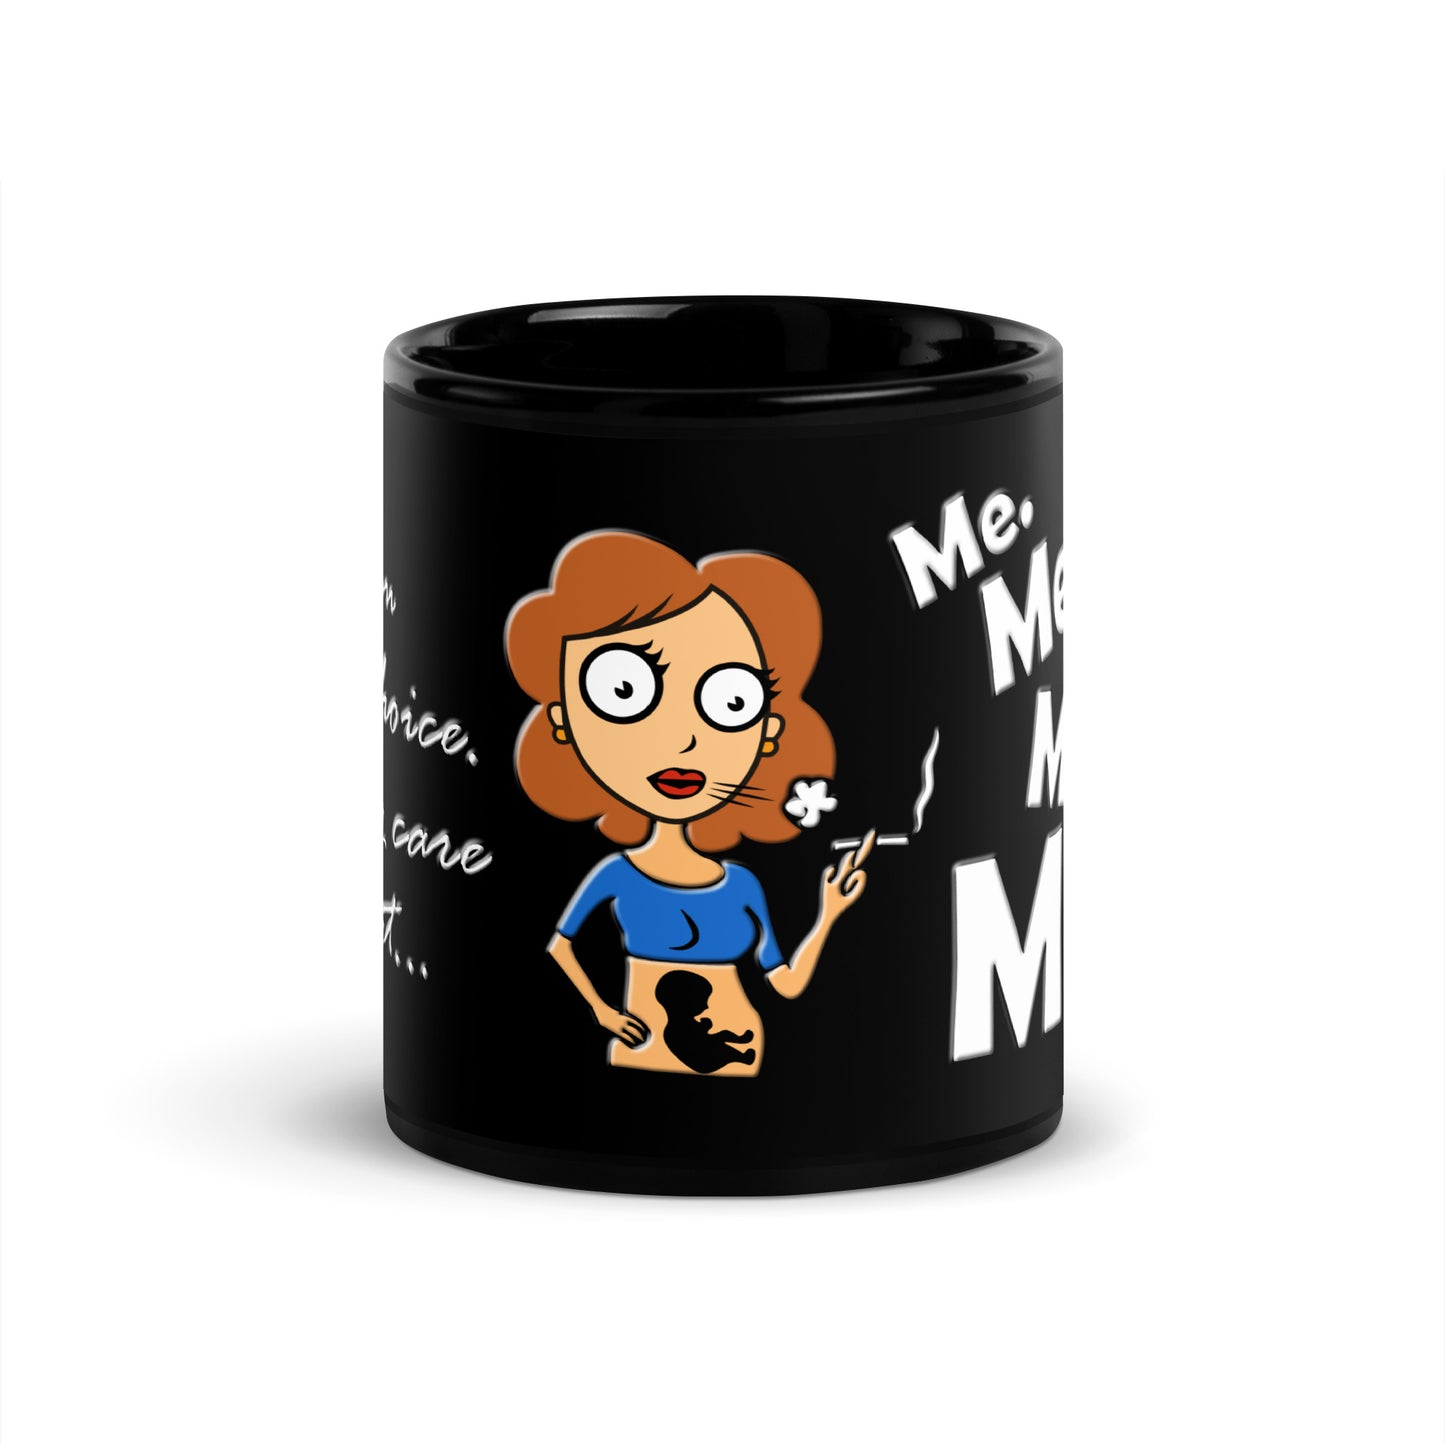 A015 Mug - Black Glossy Ceramic Mug Featuring a Graphic of a Young Pregnant Woman Smoking, with the Text “I’m Pro-choice. I Only Care About Me. Me. Me. Me. Me!”